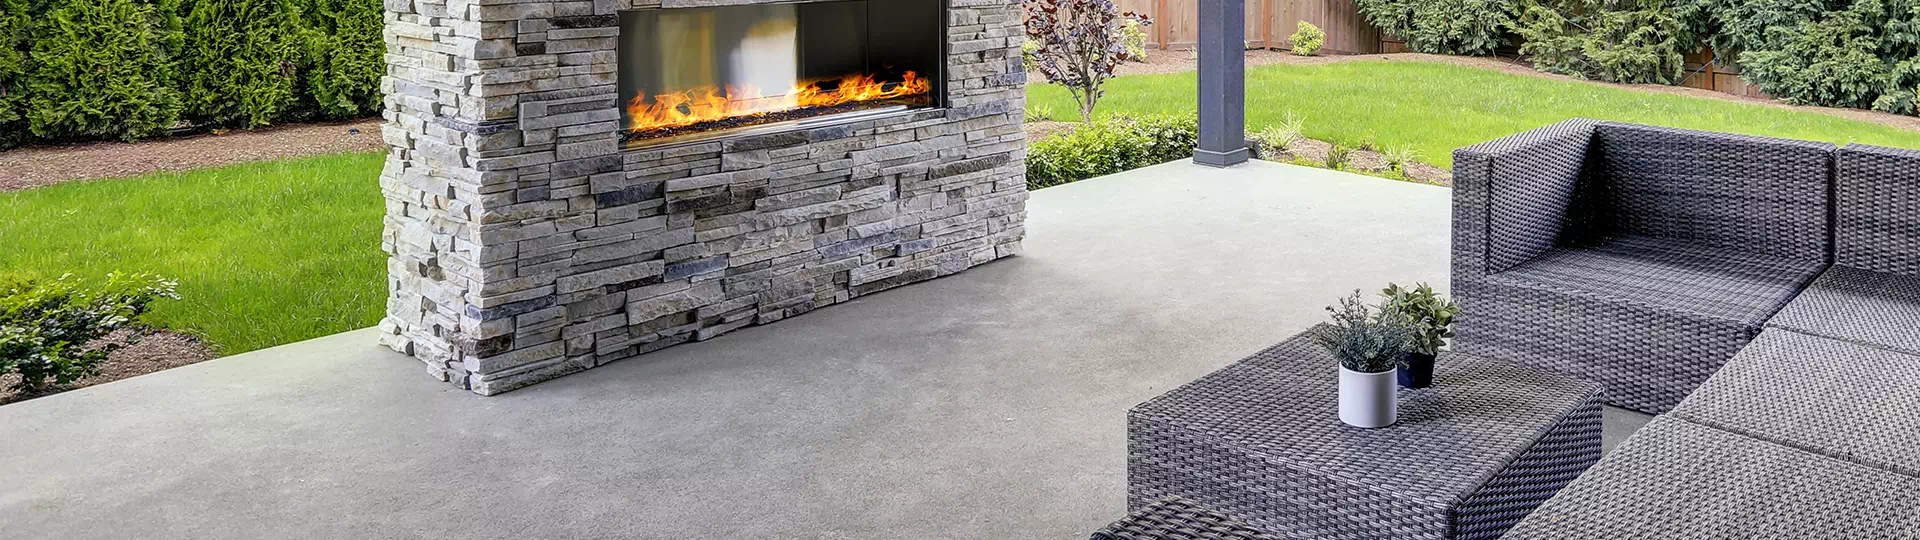 How To Clean A Concrete Patio Simple, How To Clean Stamped Concrete Patio